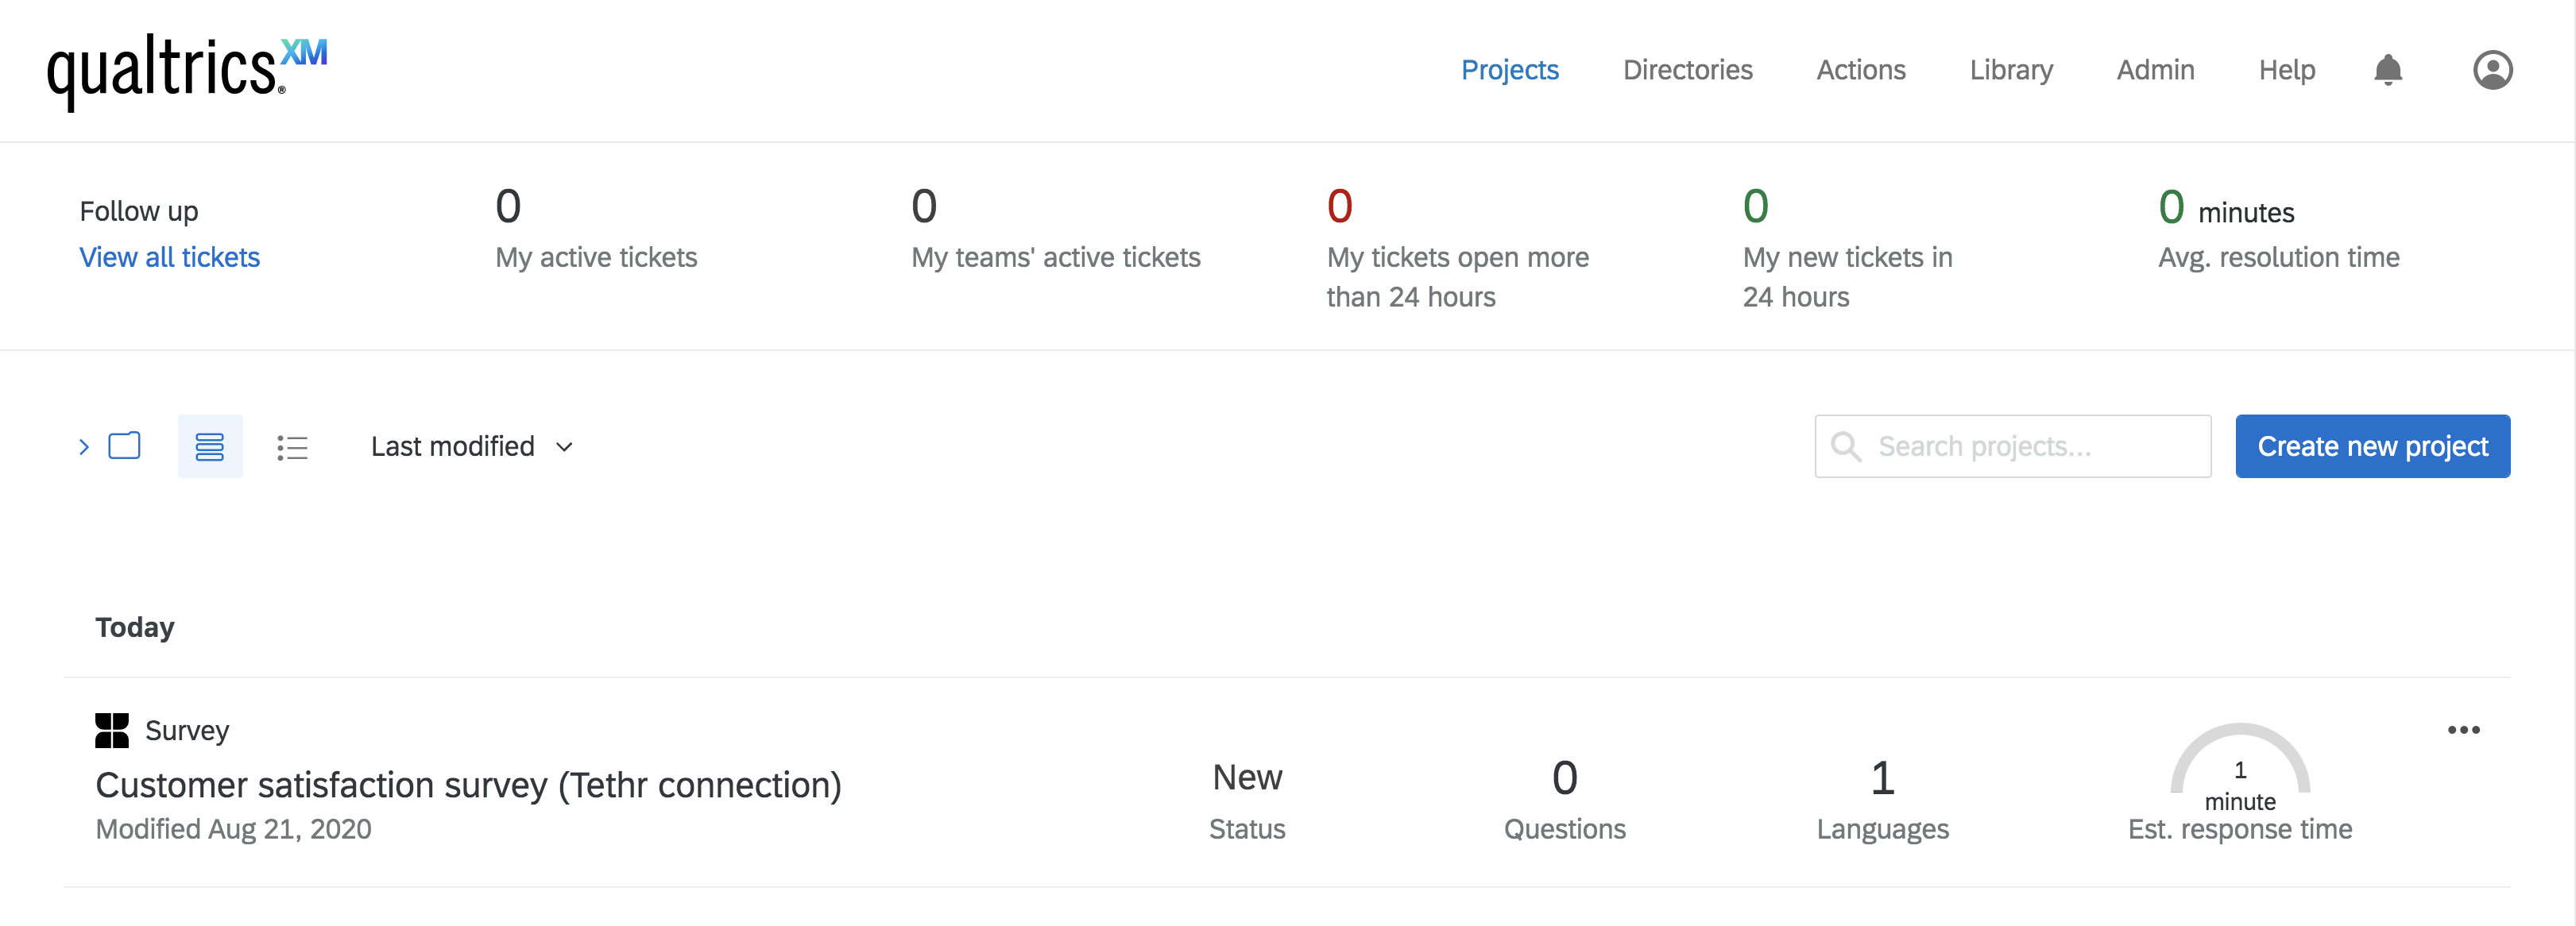 Your_new_Qualtrics_project_created_in_Tethr_will_look_like_this_under_the_Projects_tab___Qualtrics_integration_with_Tethr.png